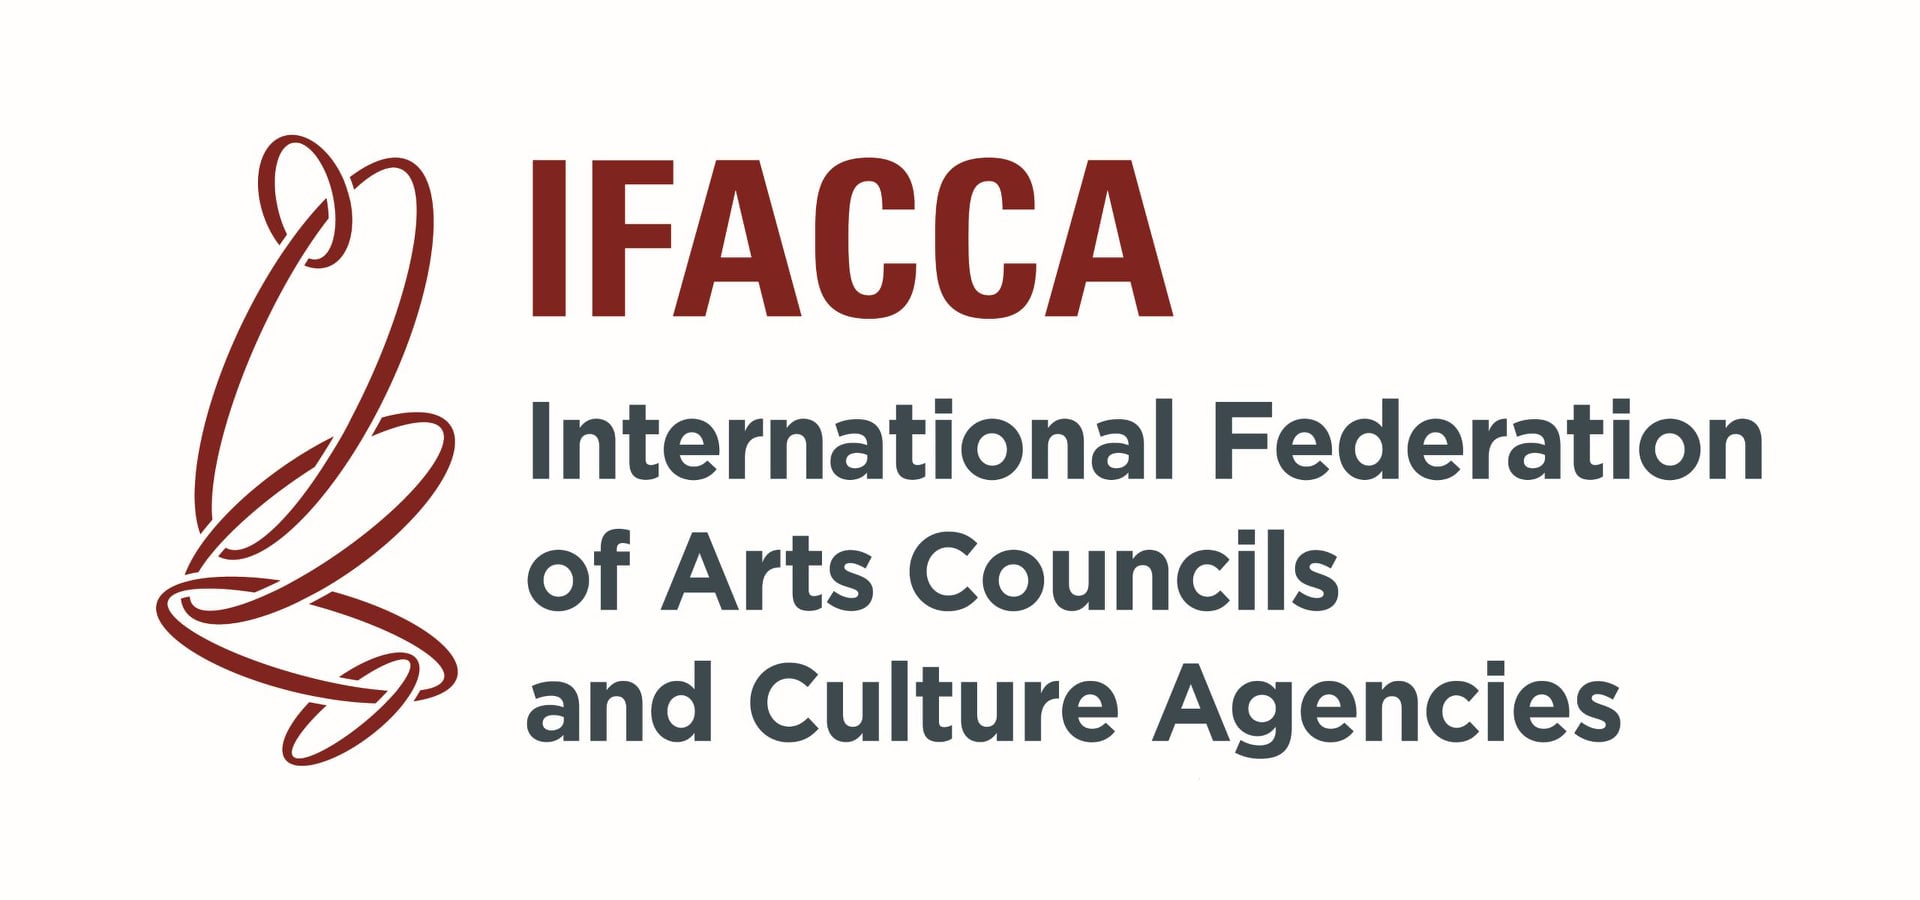 Image of  the International Federation of Arts Councils and Culture Agencies logo